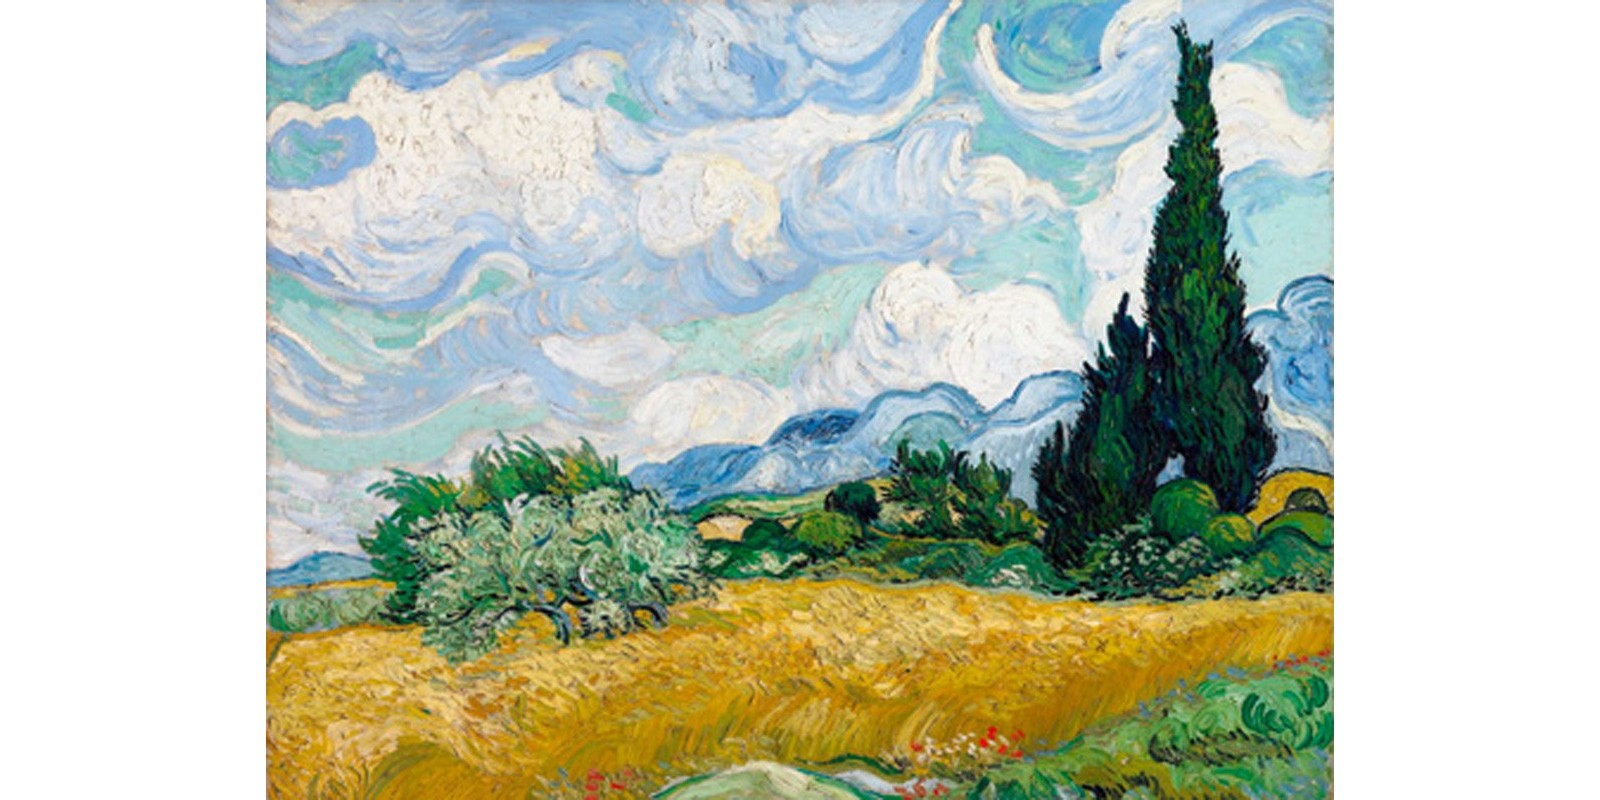 Vincent Van Gogh - Wheat Field with Cypresses